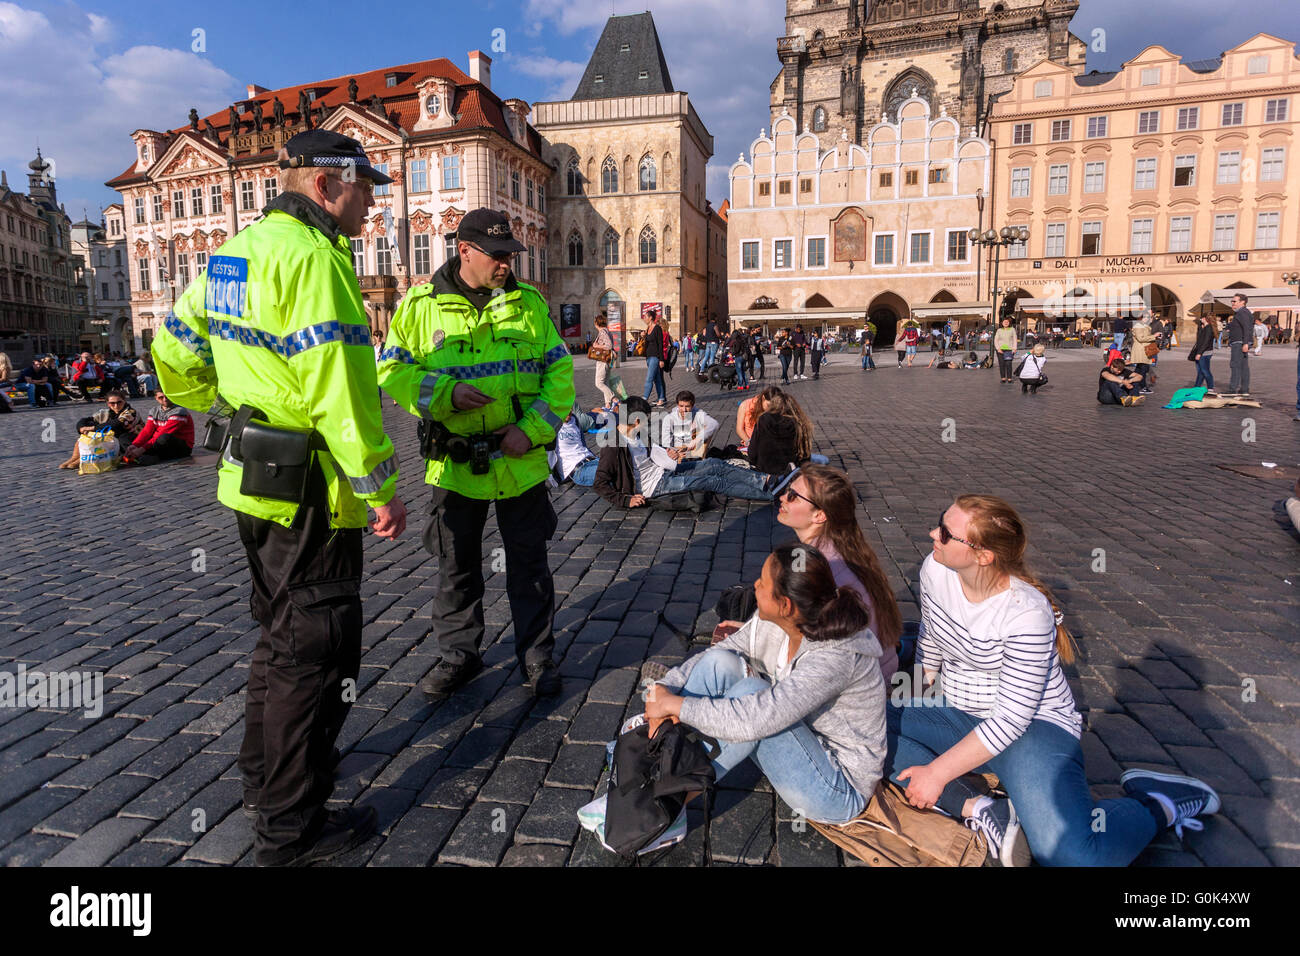 Old Town Square, Prague, Czech Republic, May 2, 2016. For feeding pigeons in a public place a disciplinary fine. Three young girls (pictured) from Poland in the Kiosks bought sausage with mustard and bread. The remaining bread, then threw pigeons. For them municipal police officers fined 300 Czech crowns (around 11 euros) each. In the case of non-payment would be a protocol, and possibly fines could reach up to 5,000 Kc. The policemen were very uncompromising and Girls paid. Stock Photo